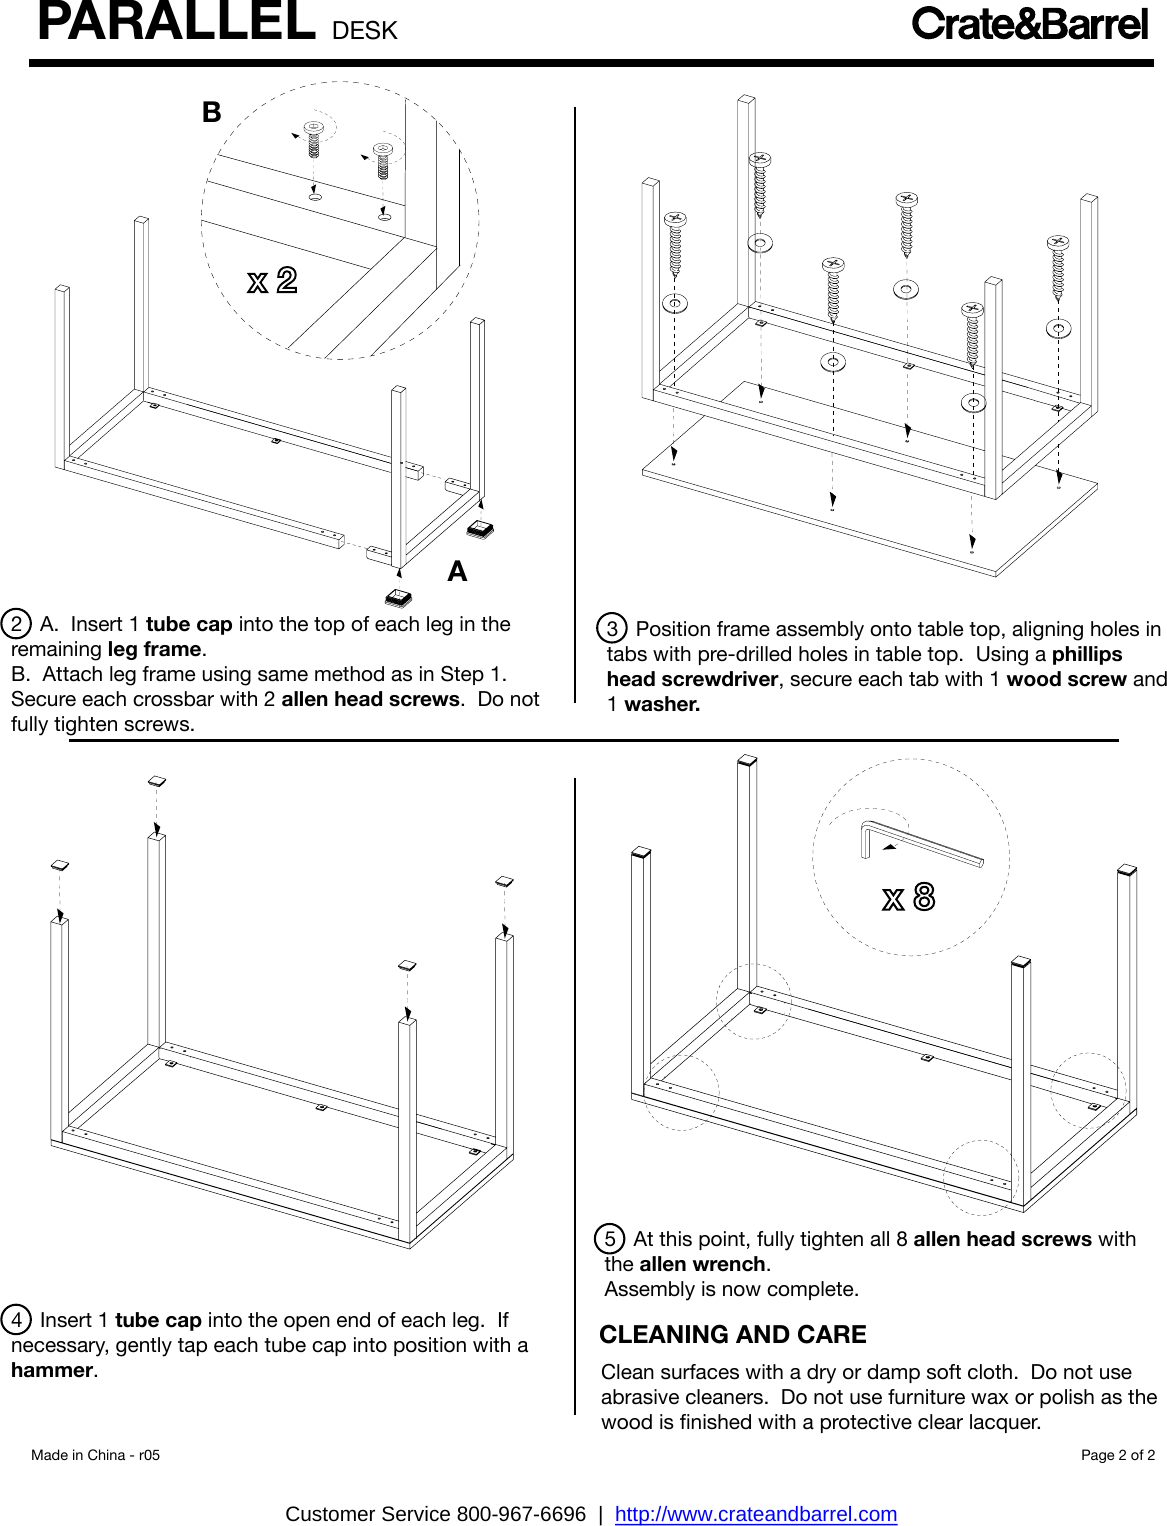 Crate Barrel 756 Parallel Desk Assembly Instructions From And